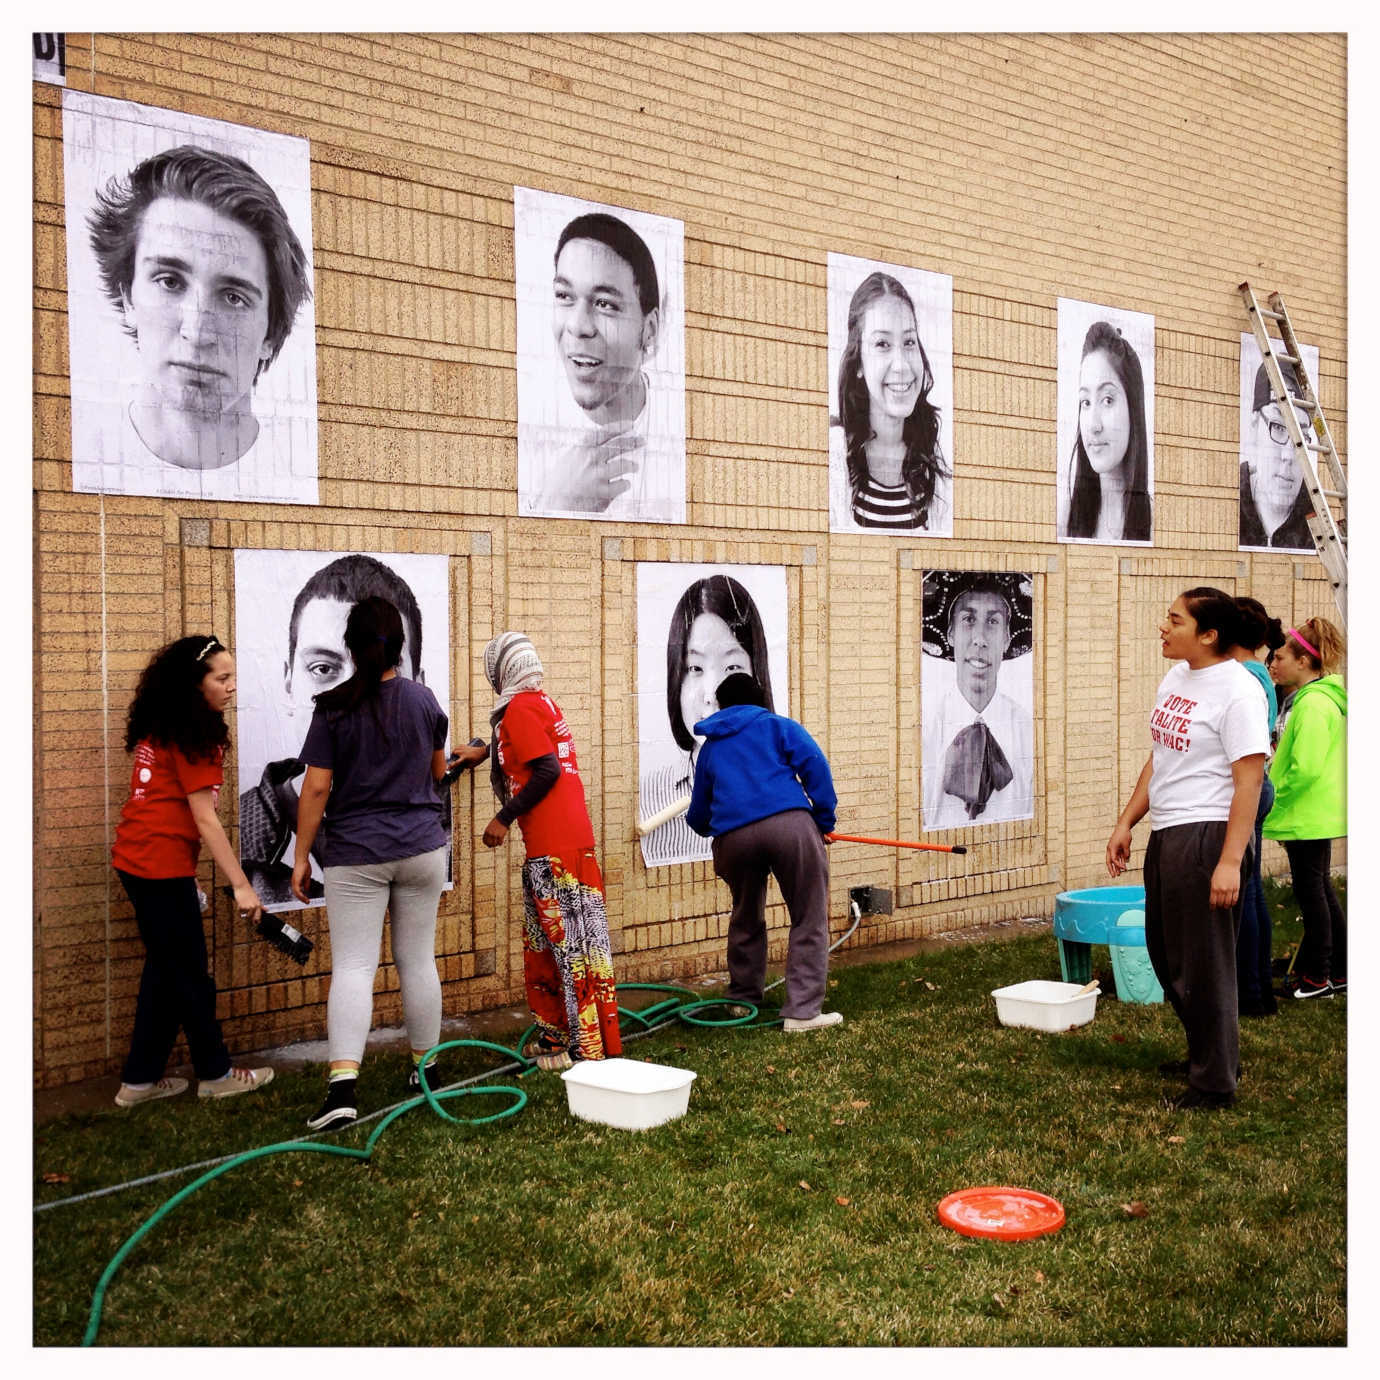 Students work together to post the representative photos of their classmates to a prominent exterior wall of the school. Photo courtesy of Trisha Empey.